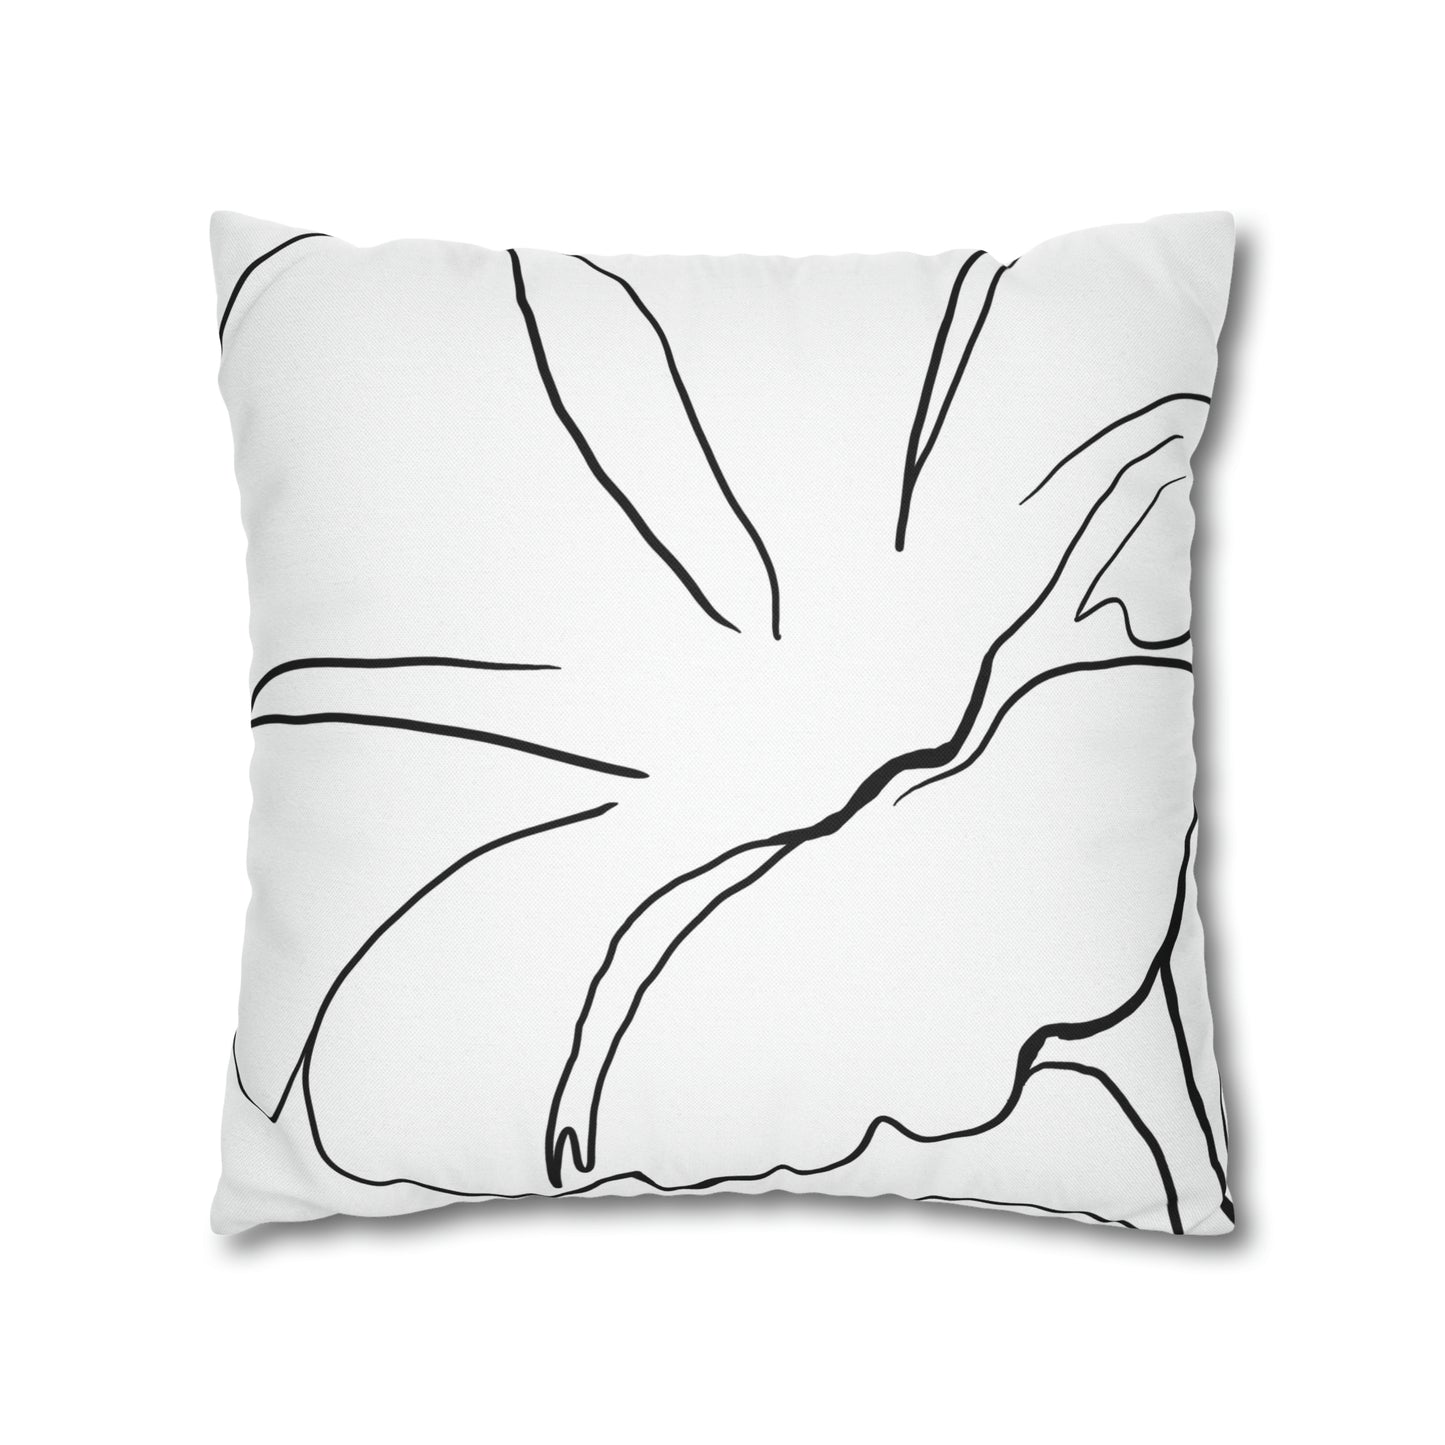 September Birth Flower Double-Sided Pillow Cover